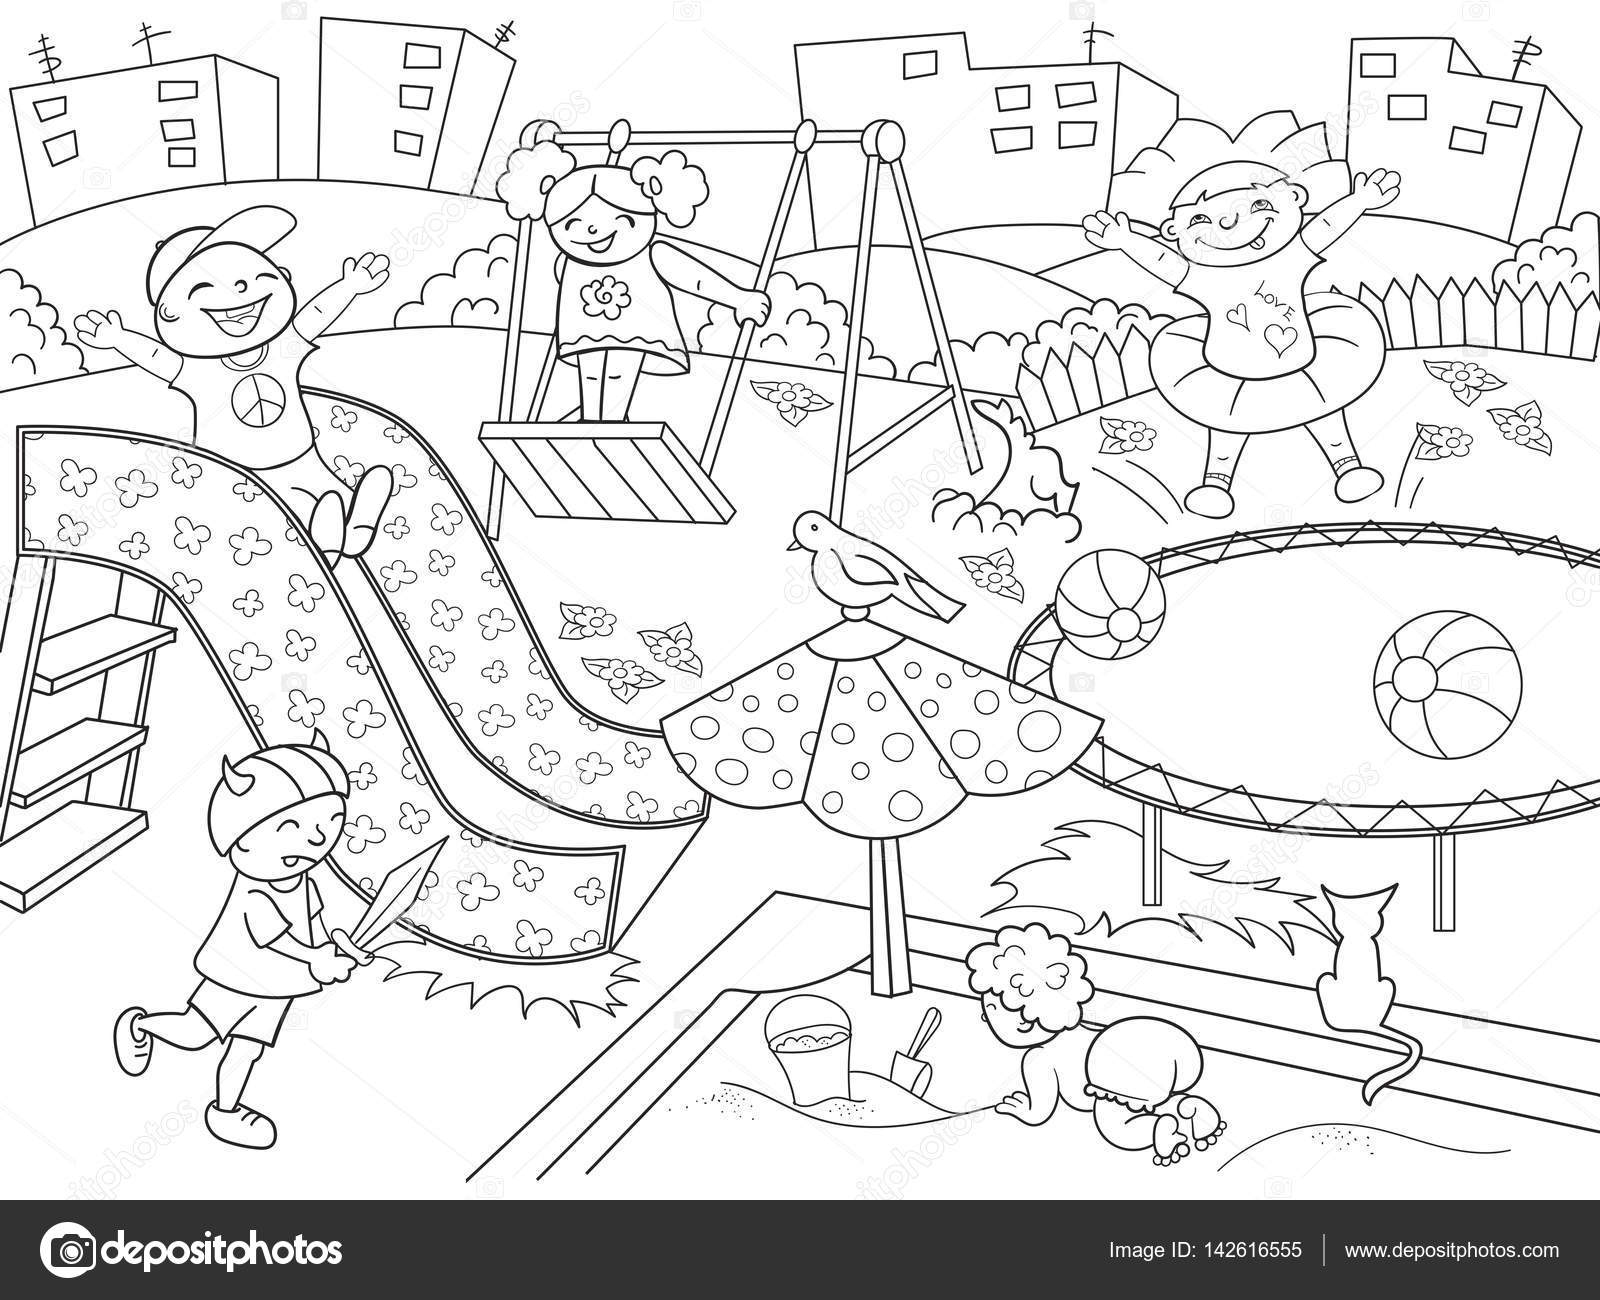 Childrens playground coloring. Vector illustration of black and white ...